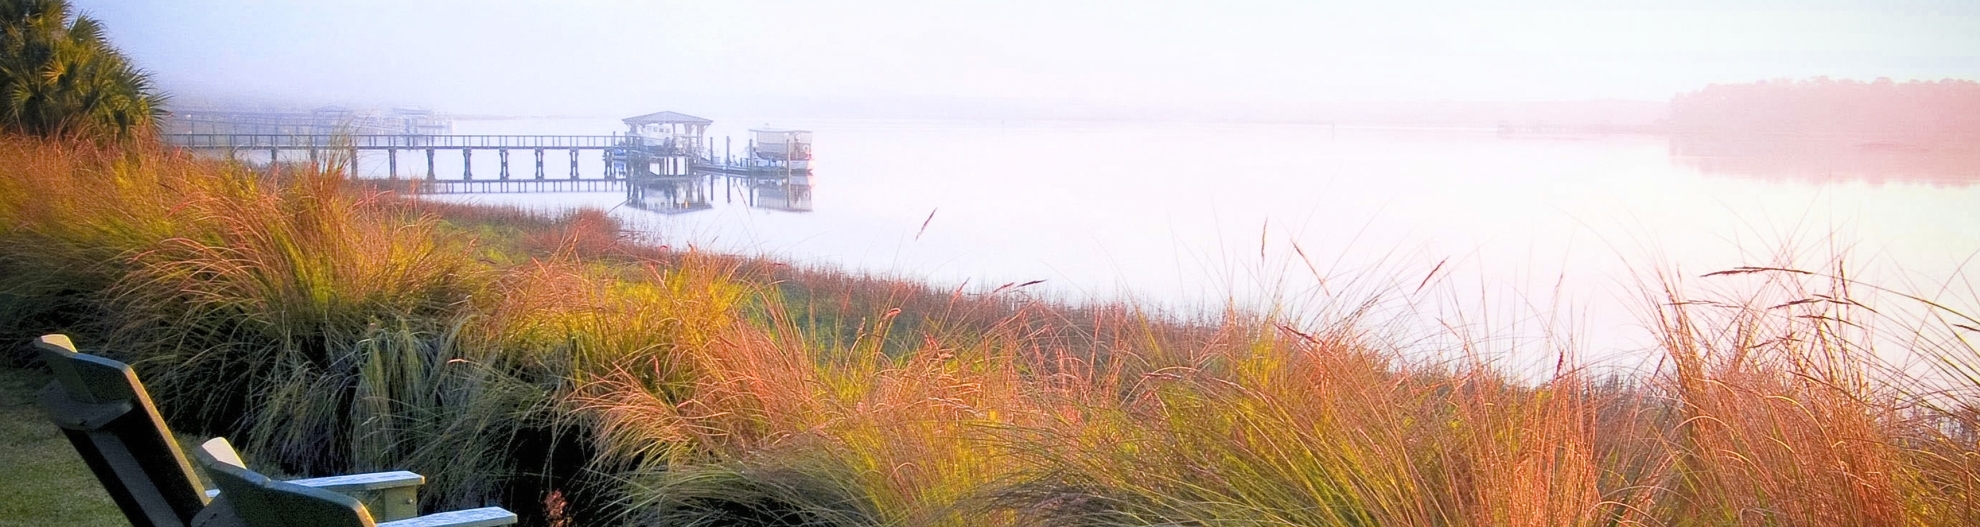 As morning fog rises over the May River in Palmetto Bluff, South Carolina